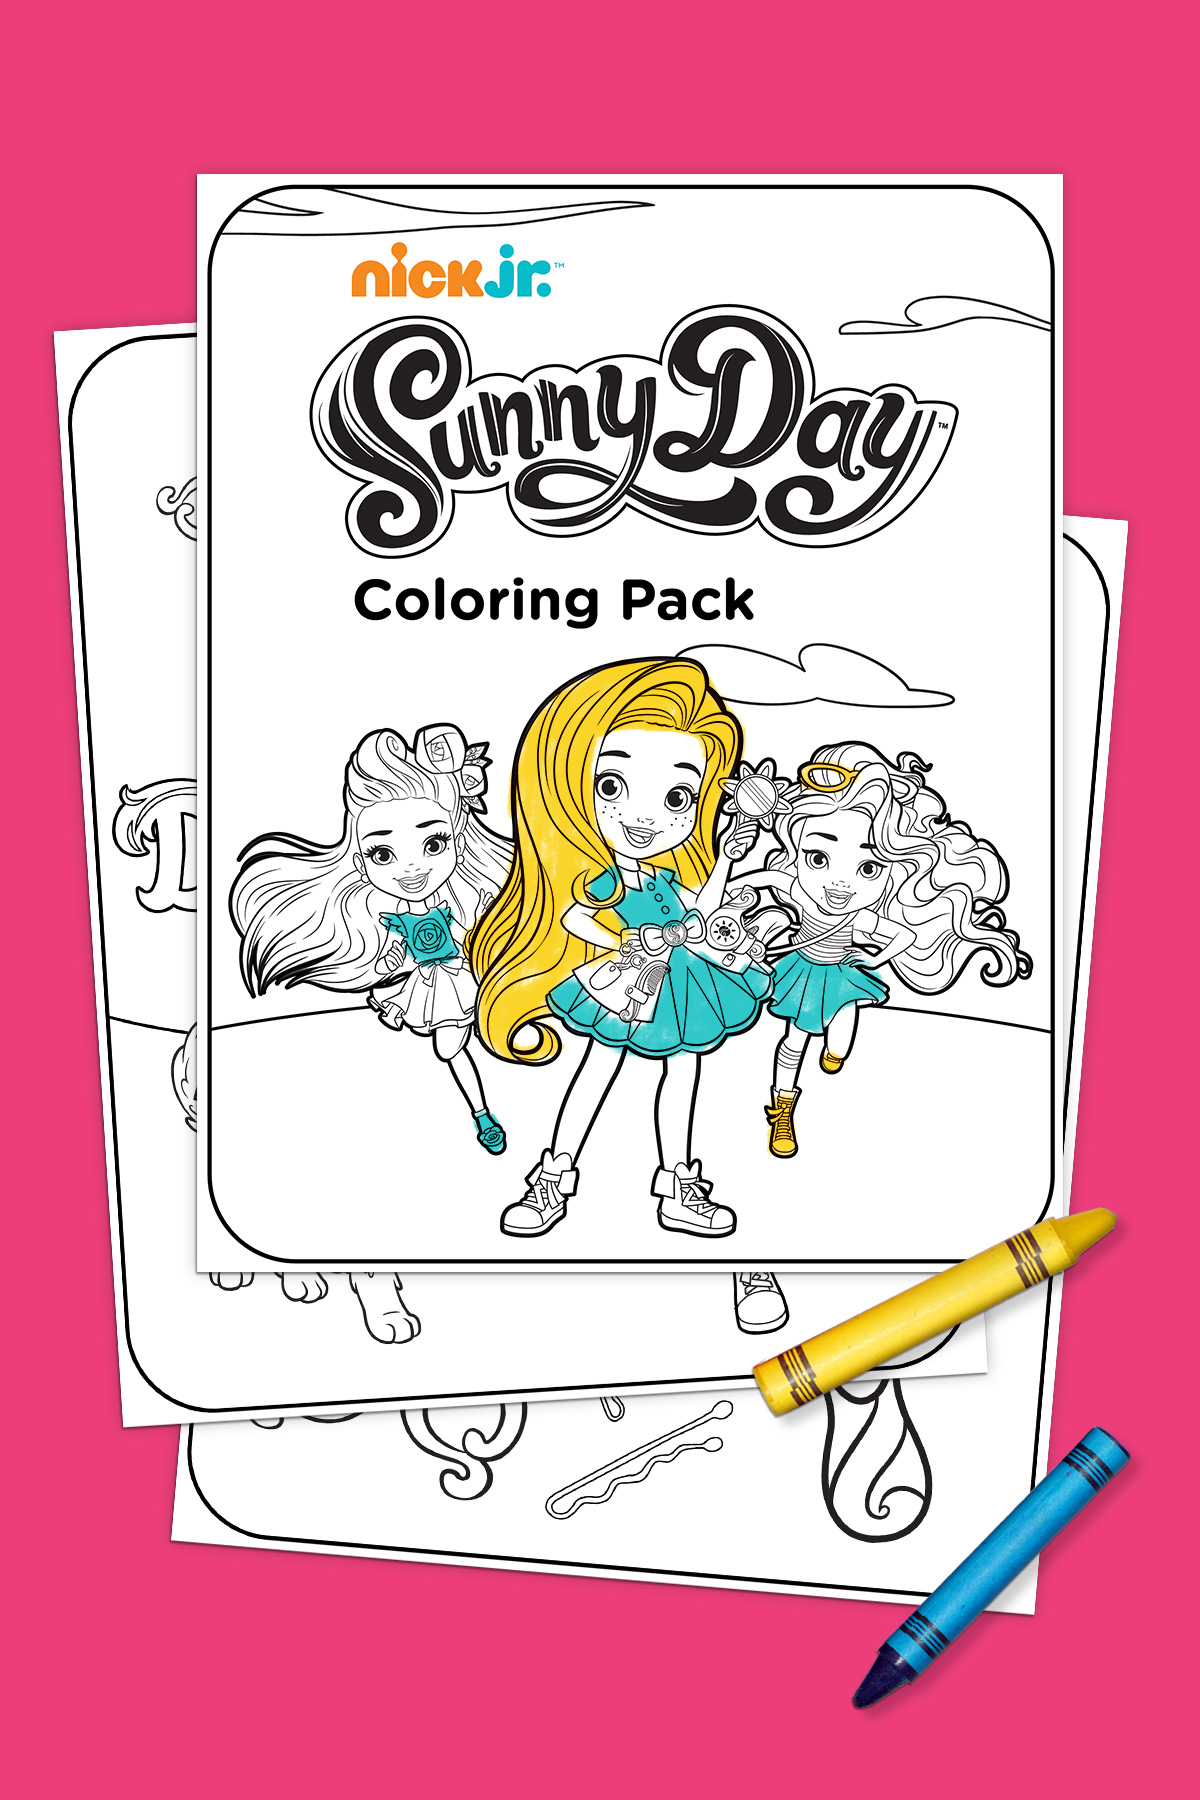 Sunny Day Coloring Pack Nickelodeon Parents Make your world more colorful with printable coloring pages from crayola. sunny day coloring pack nickelodeon